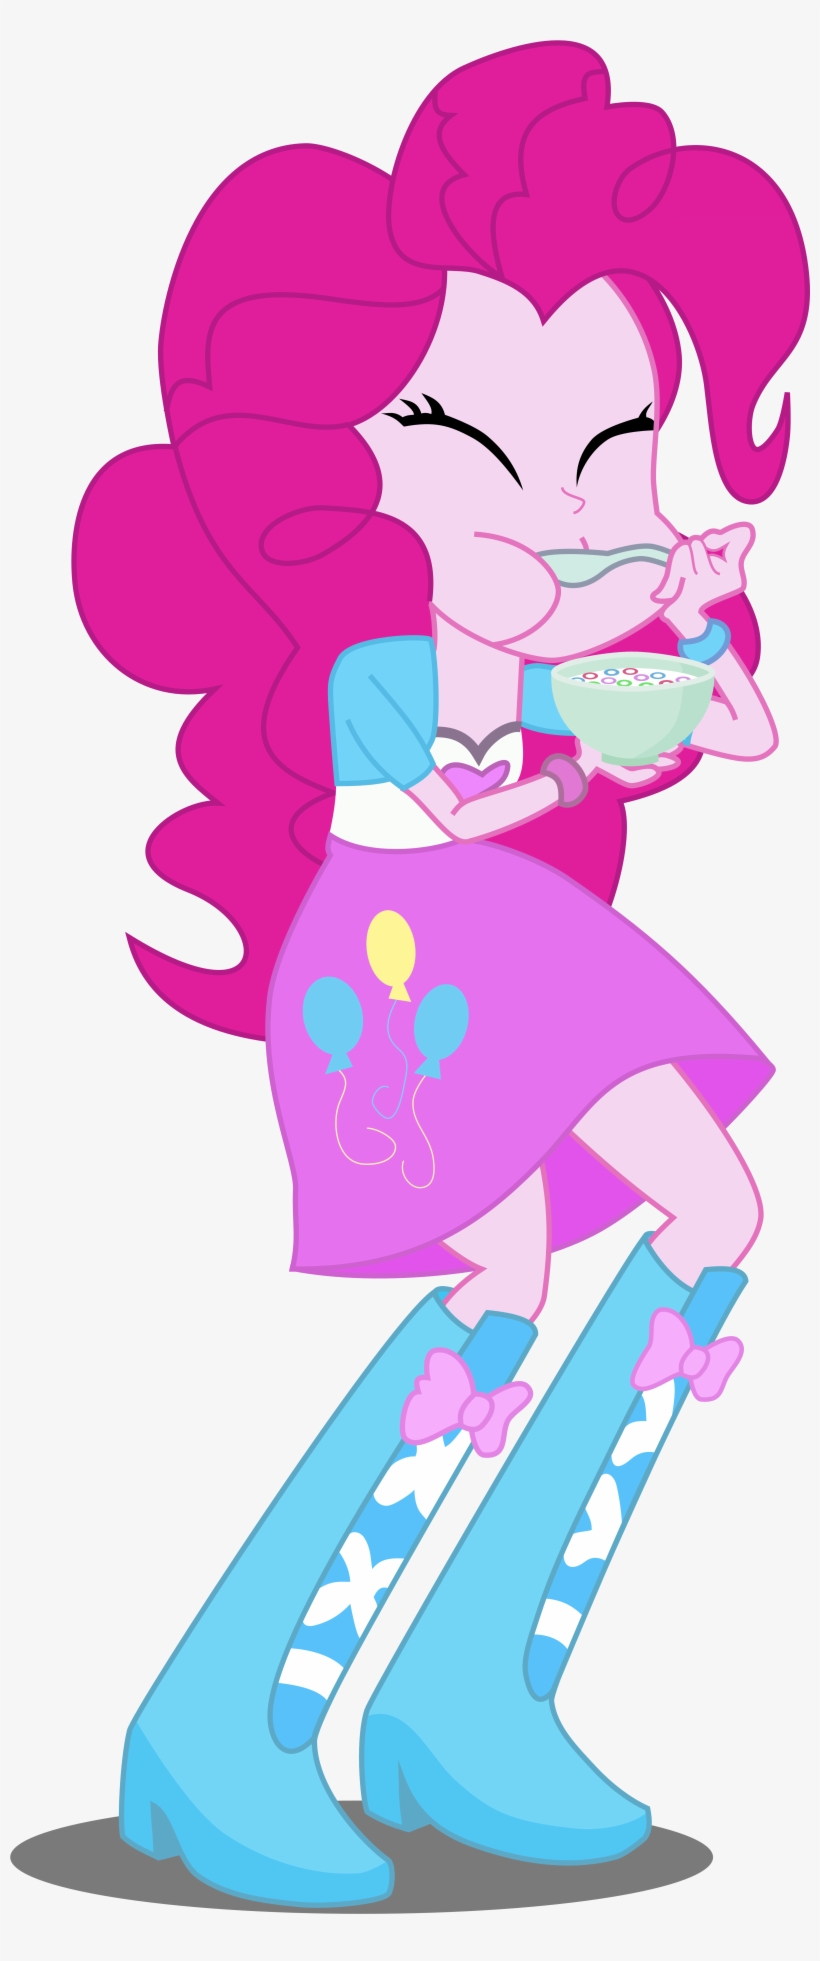 Pinkie Pie Breakfast Cereal Pink Mammal Fictional Character - Mlp Equestria Girls Pinkie Pie, transparent png #709970